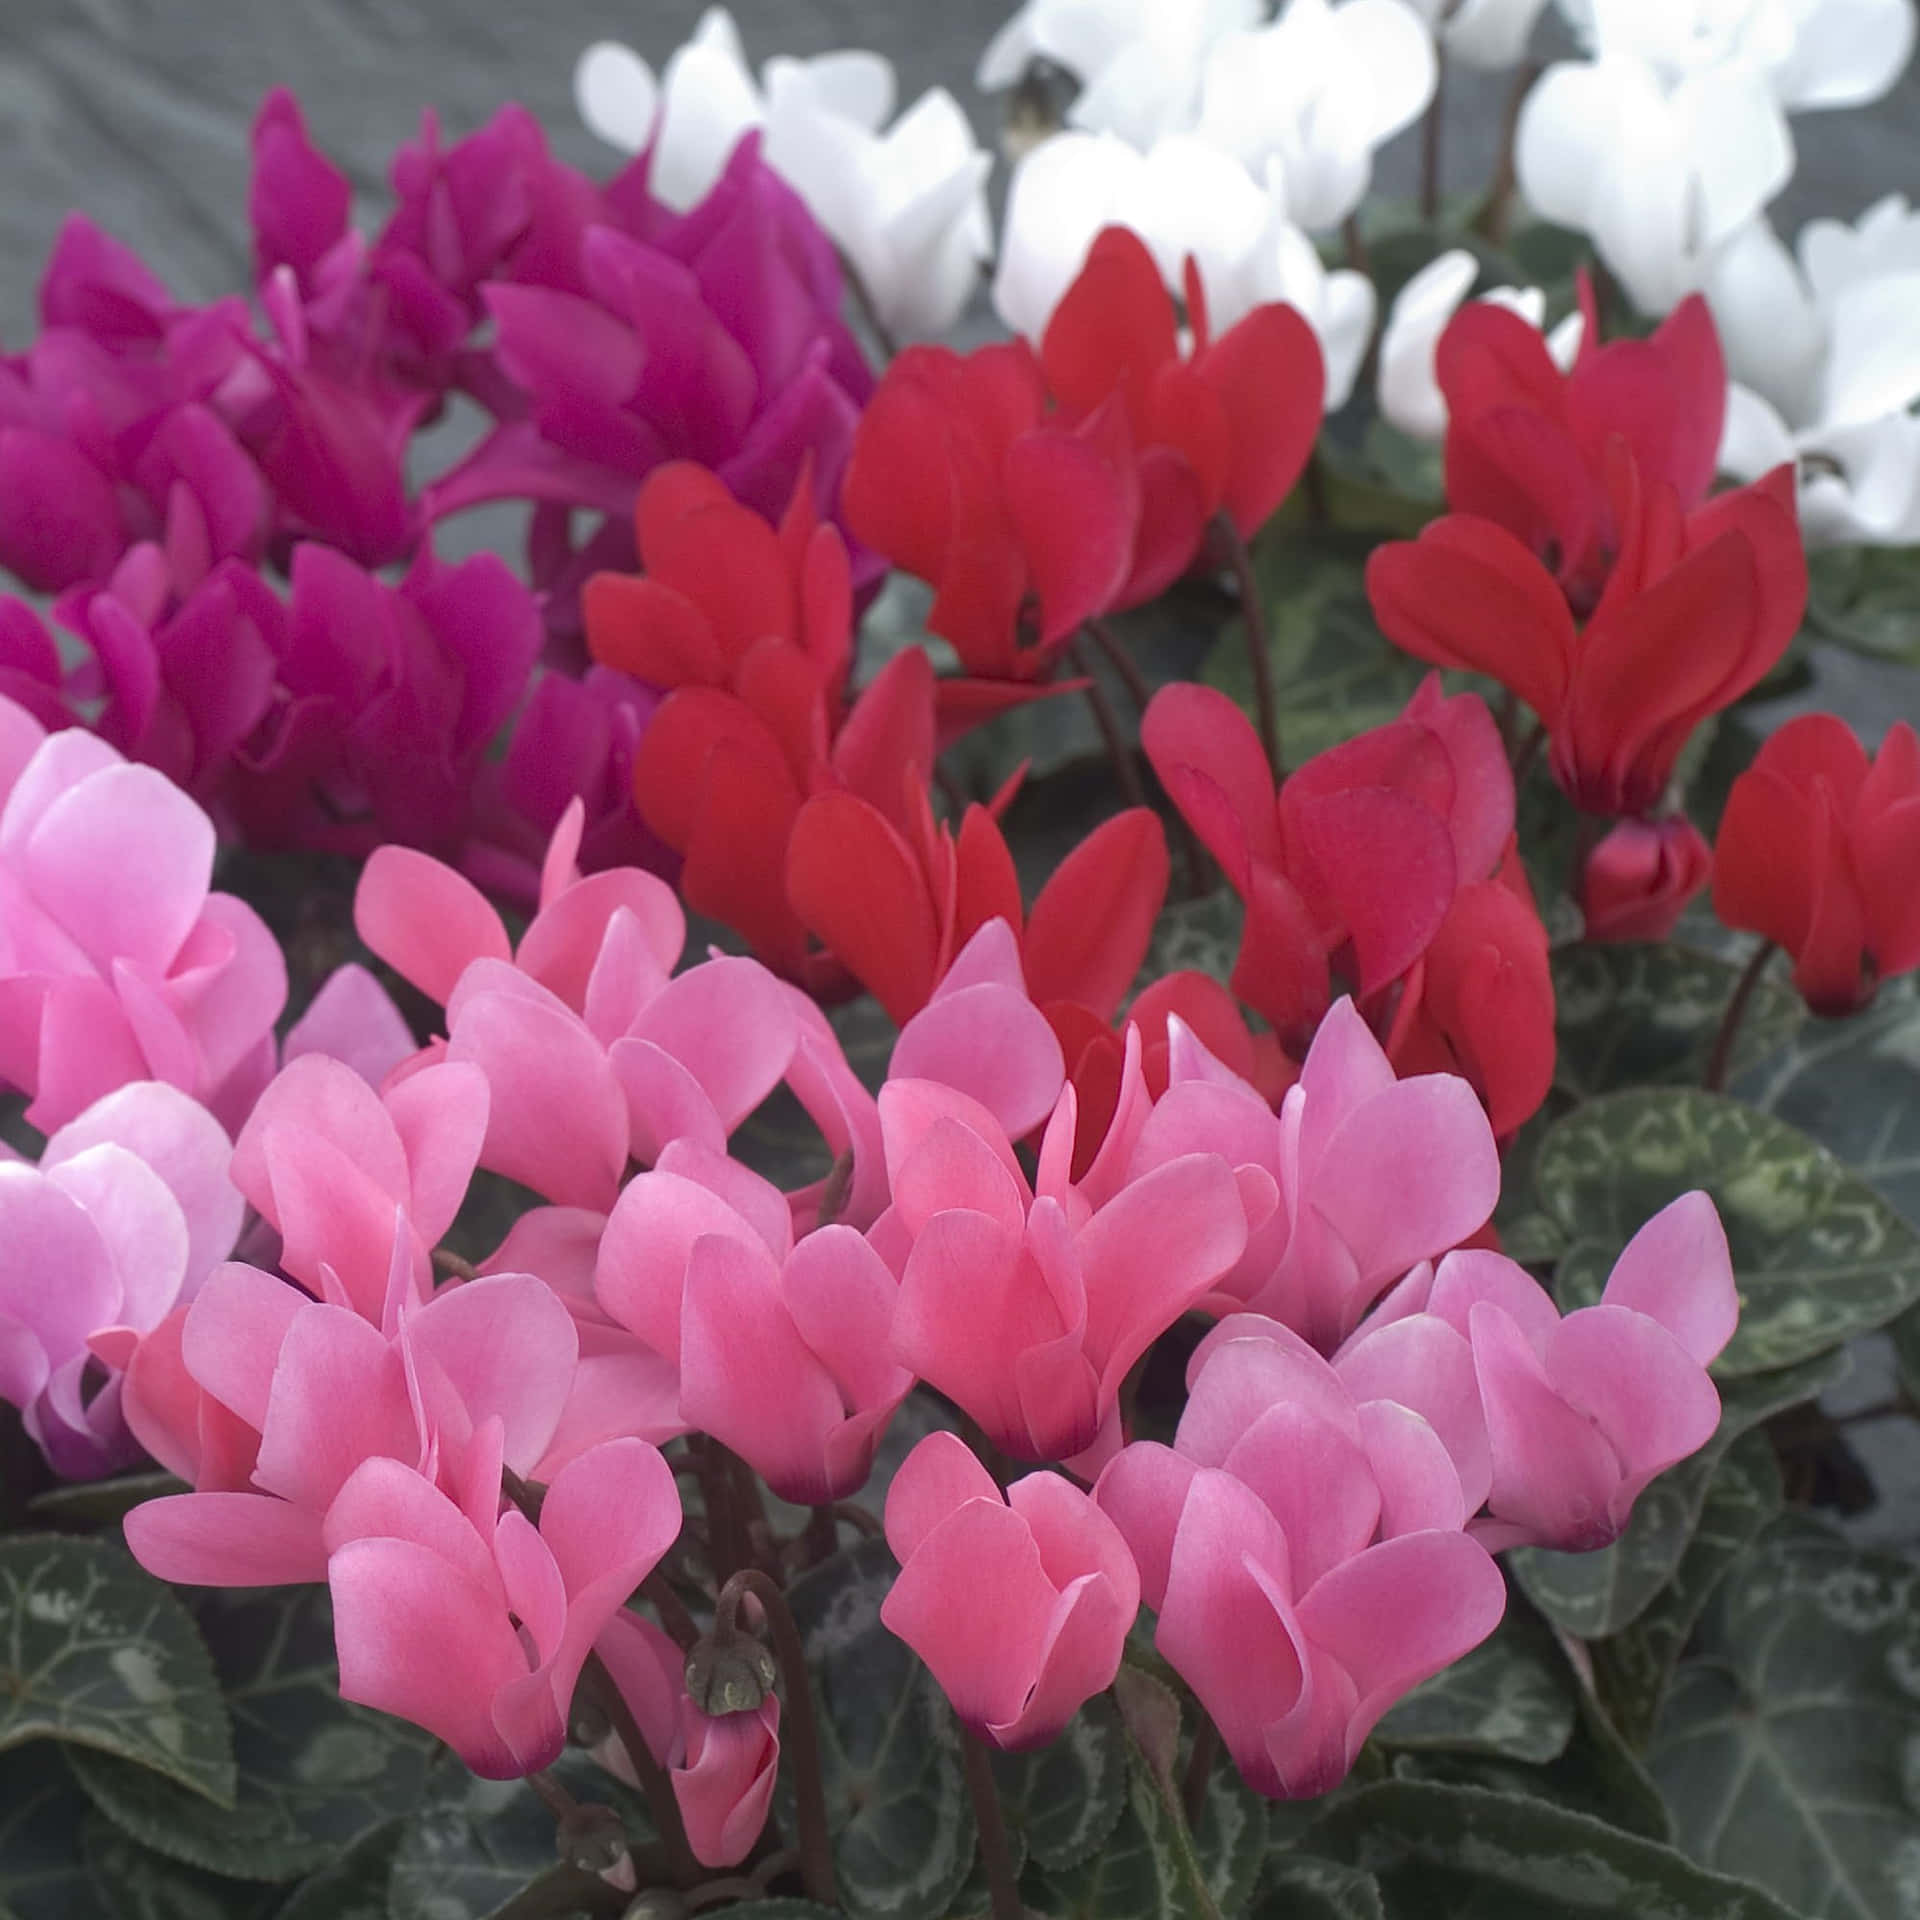 "Small, Pink and Beautiful - This Cyclamen Brightens Up the Garden"